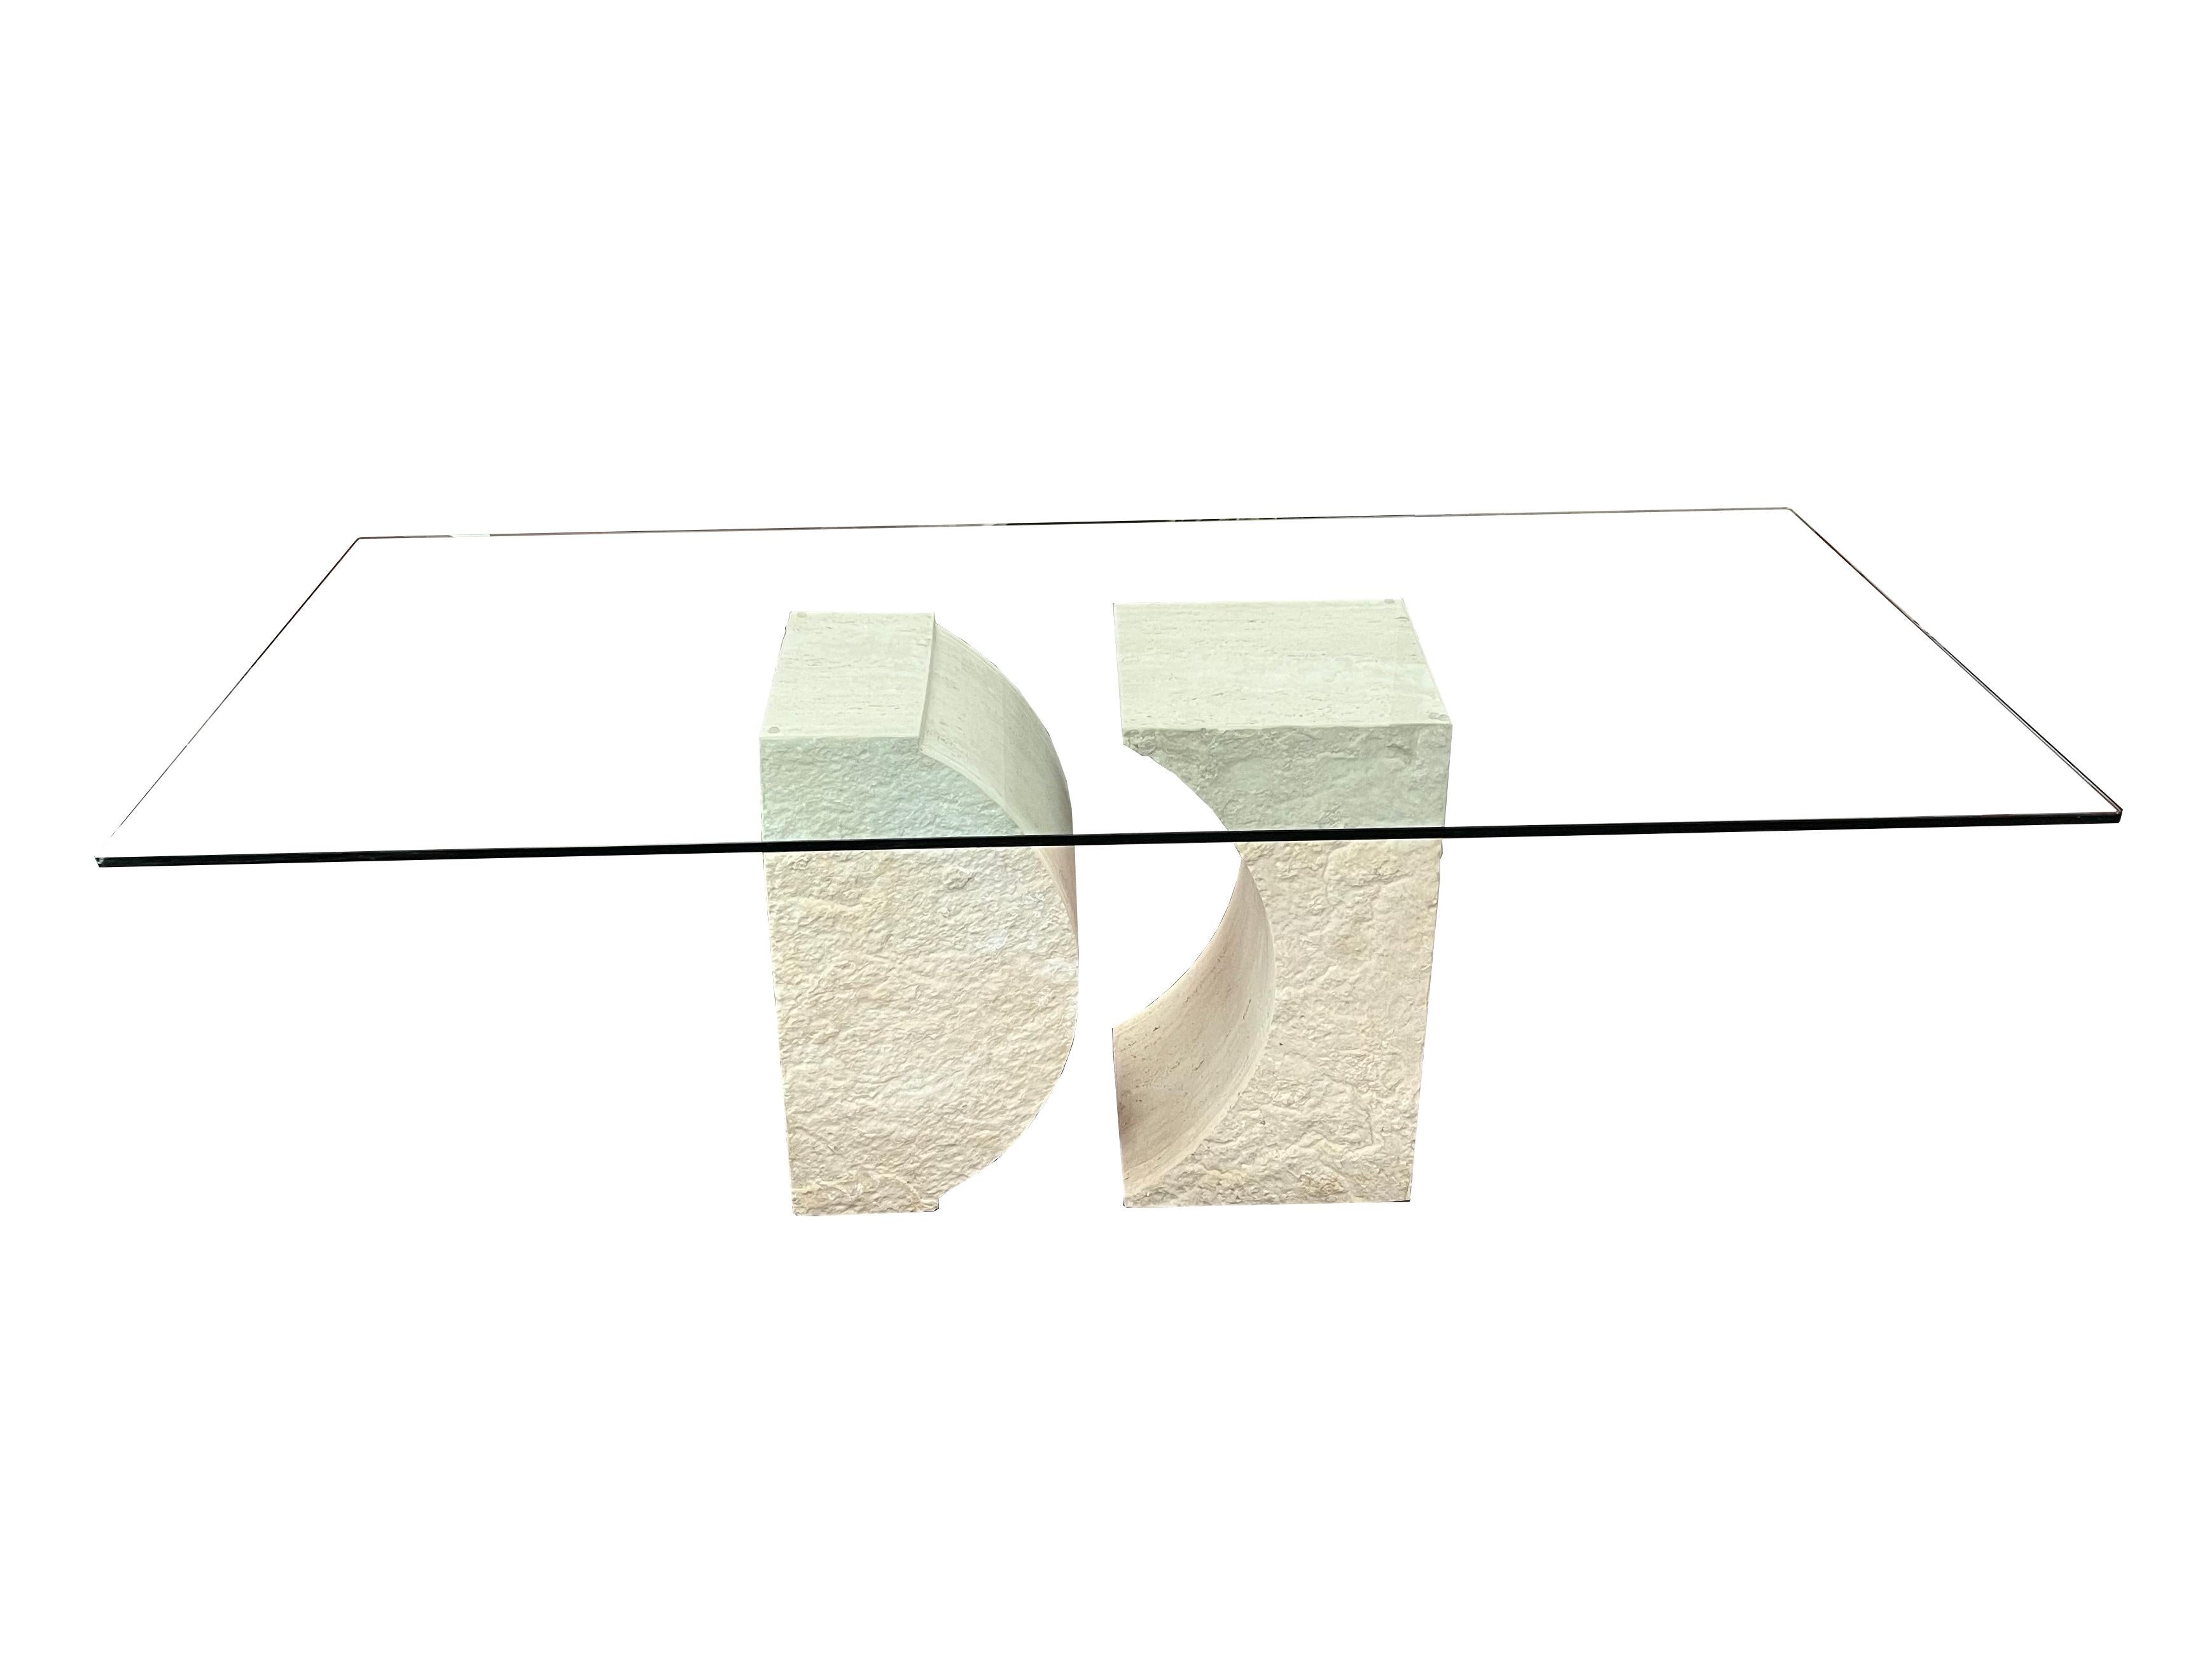 Late 20th Century Balma Dining Table Coastal Travertine Marble MidCentury Original Limited Edition For Sale